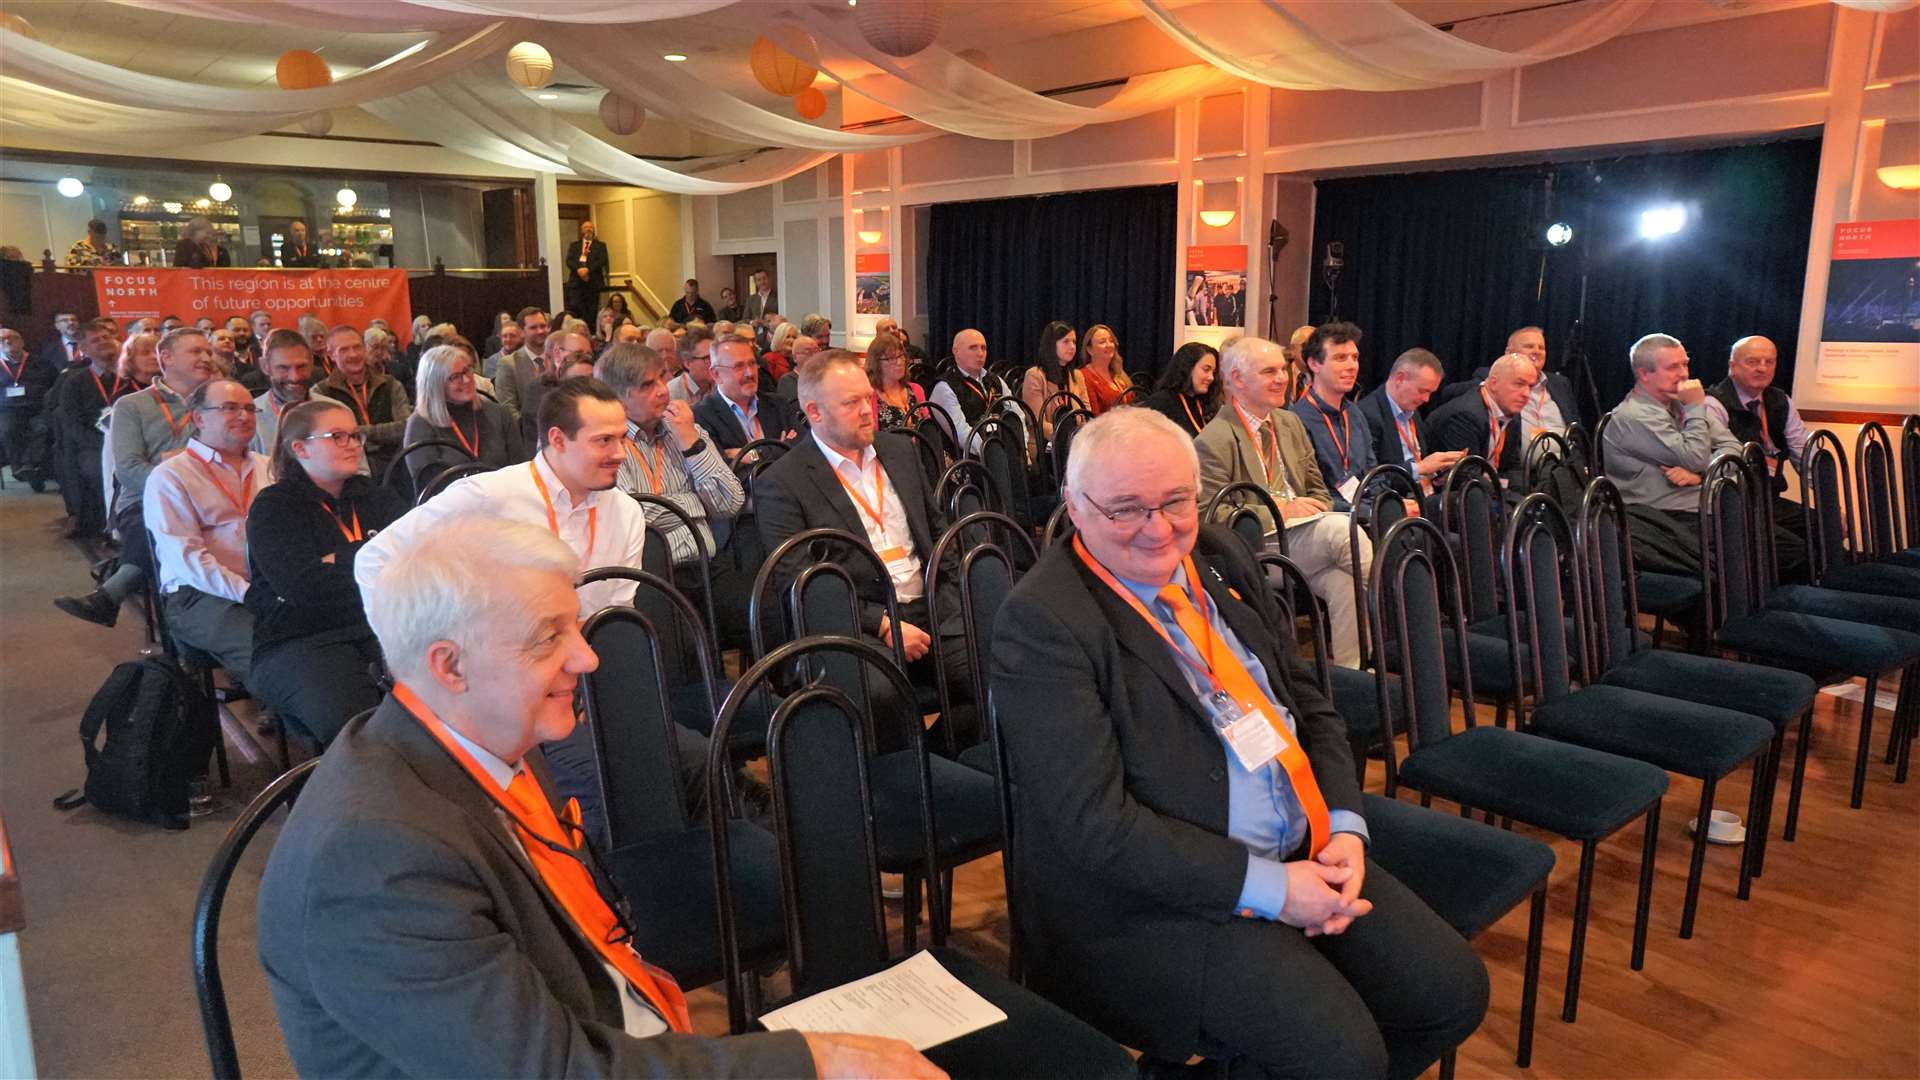 Peter Faccenda (Focus North programme manager) and Simon Middlemas (Focus North chairman) in the foreground at the event in Thurso. Picture: DGS